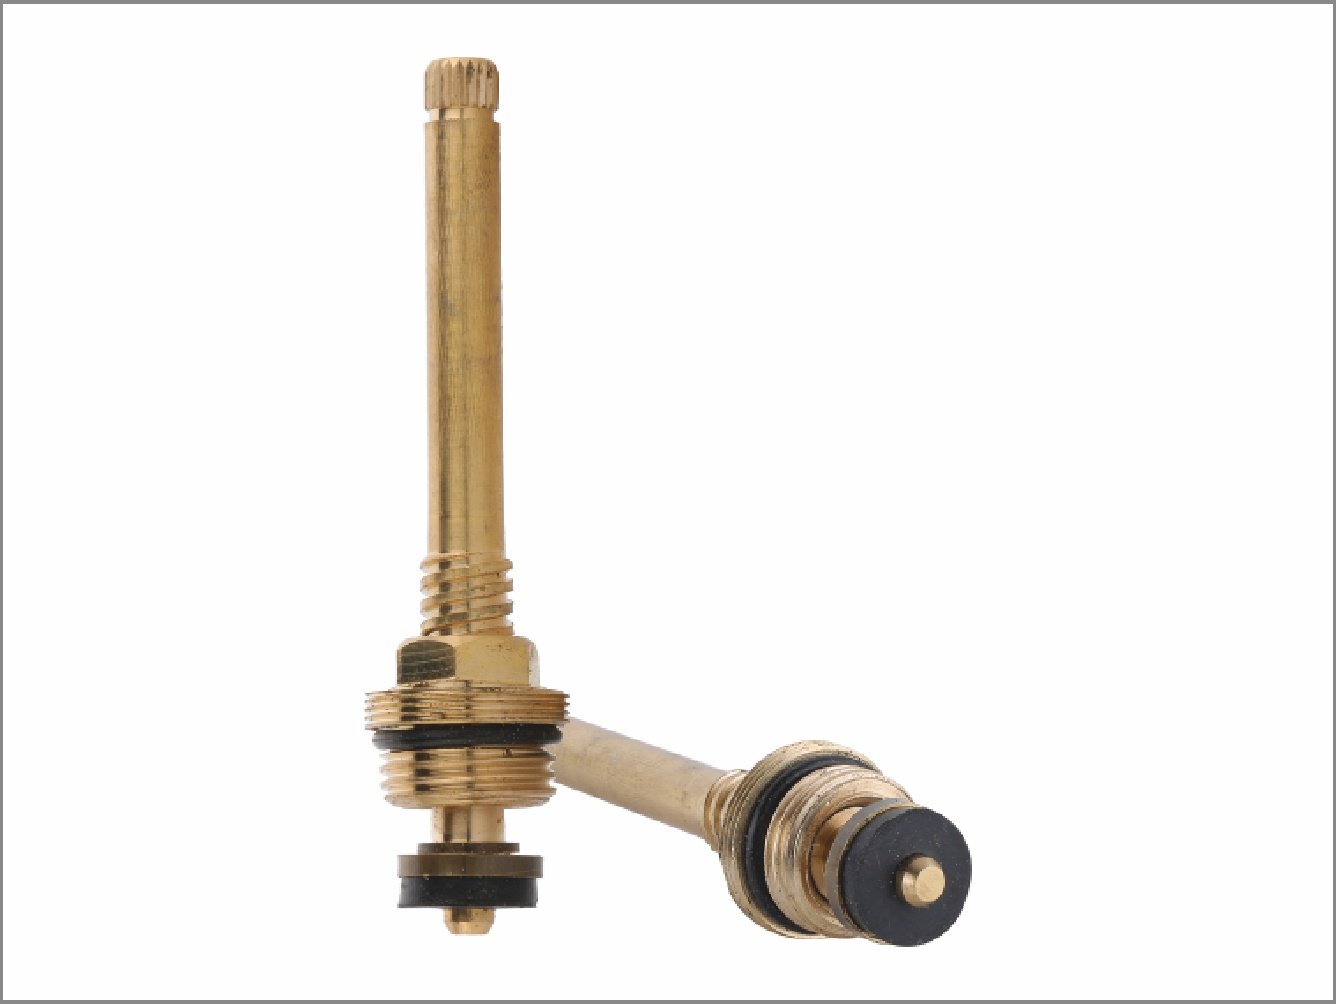 ACC-1021 - 1/2 Concealed Spindle at Chesta Bath Fittings